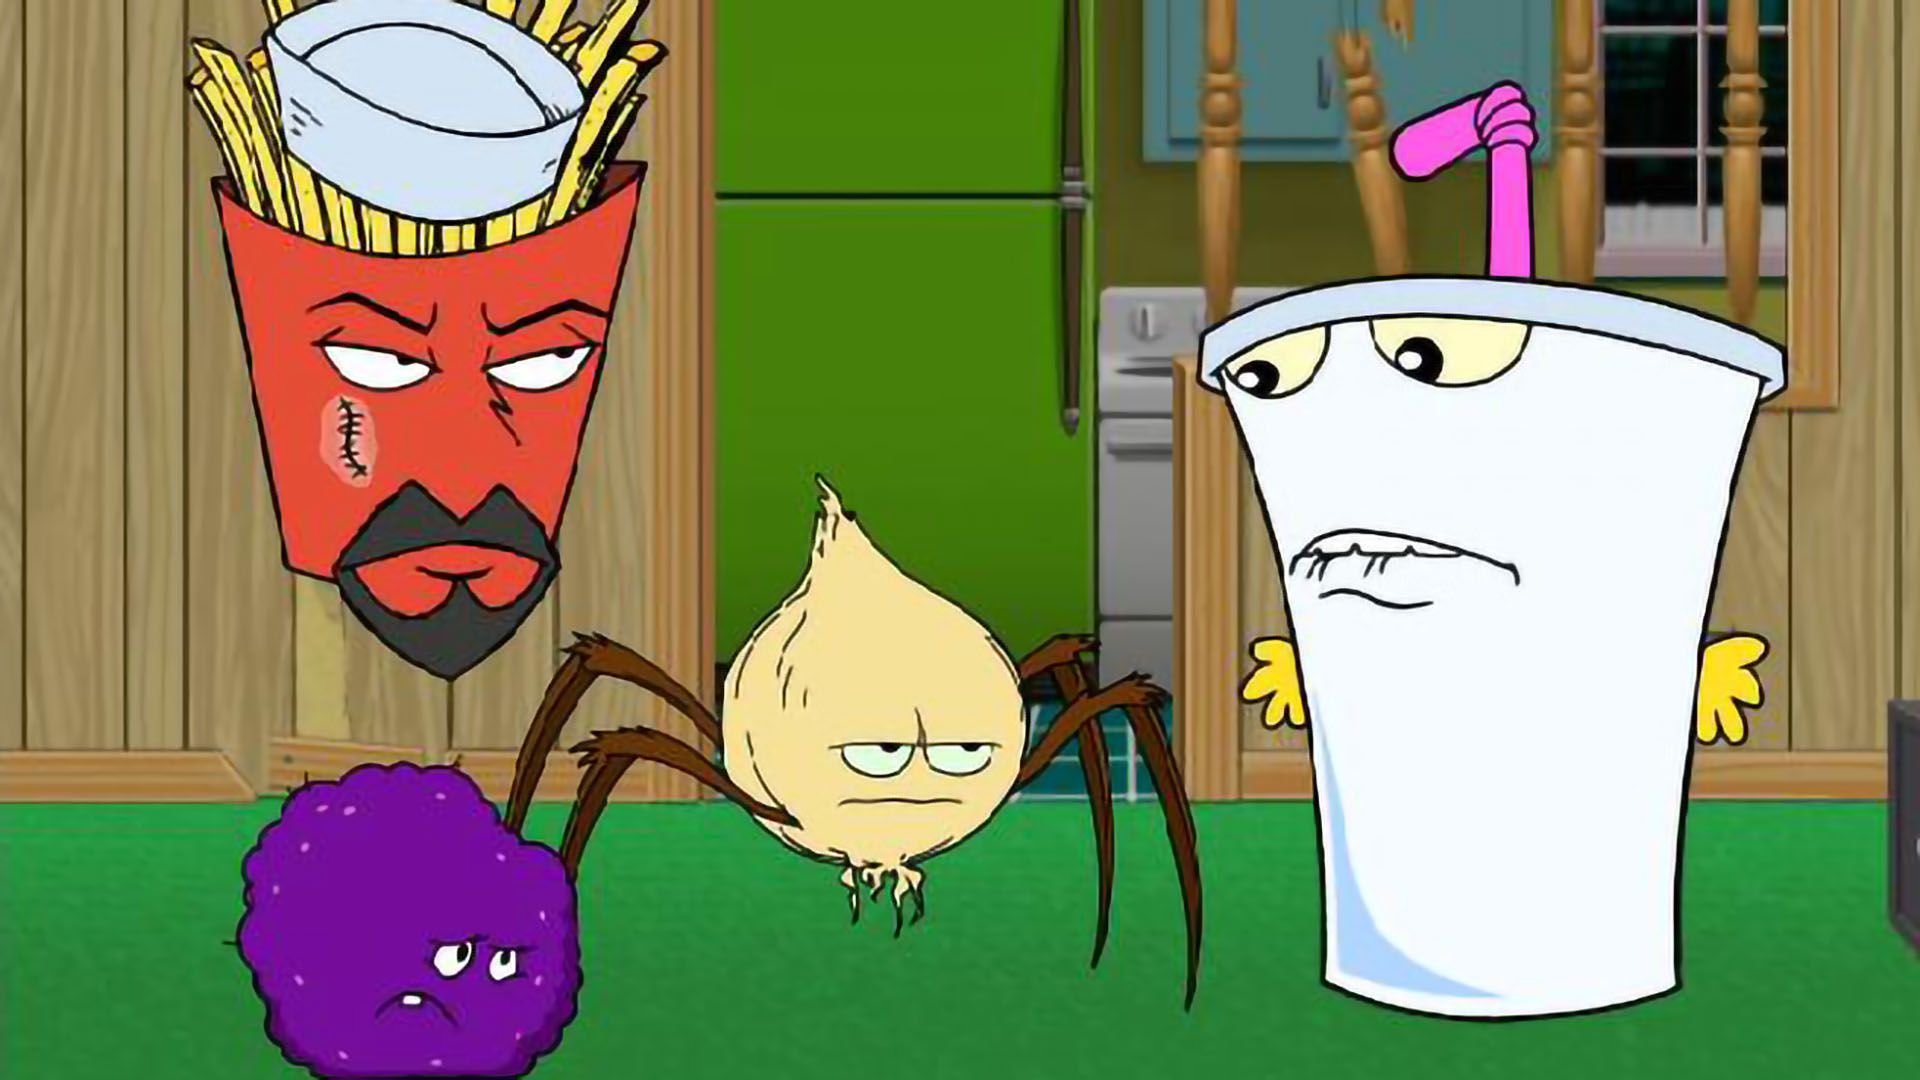 Teen Force Shaved - Watch Aqua Teen Hunger Force from Adult Swim